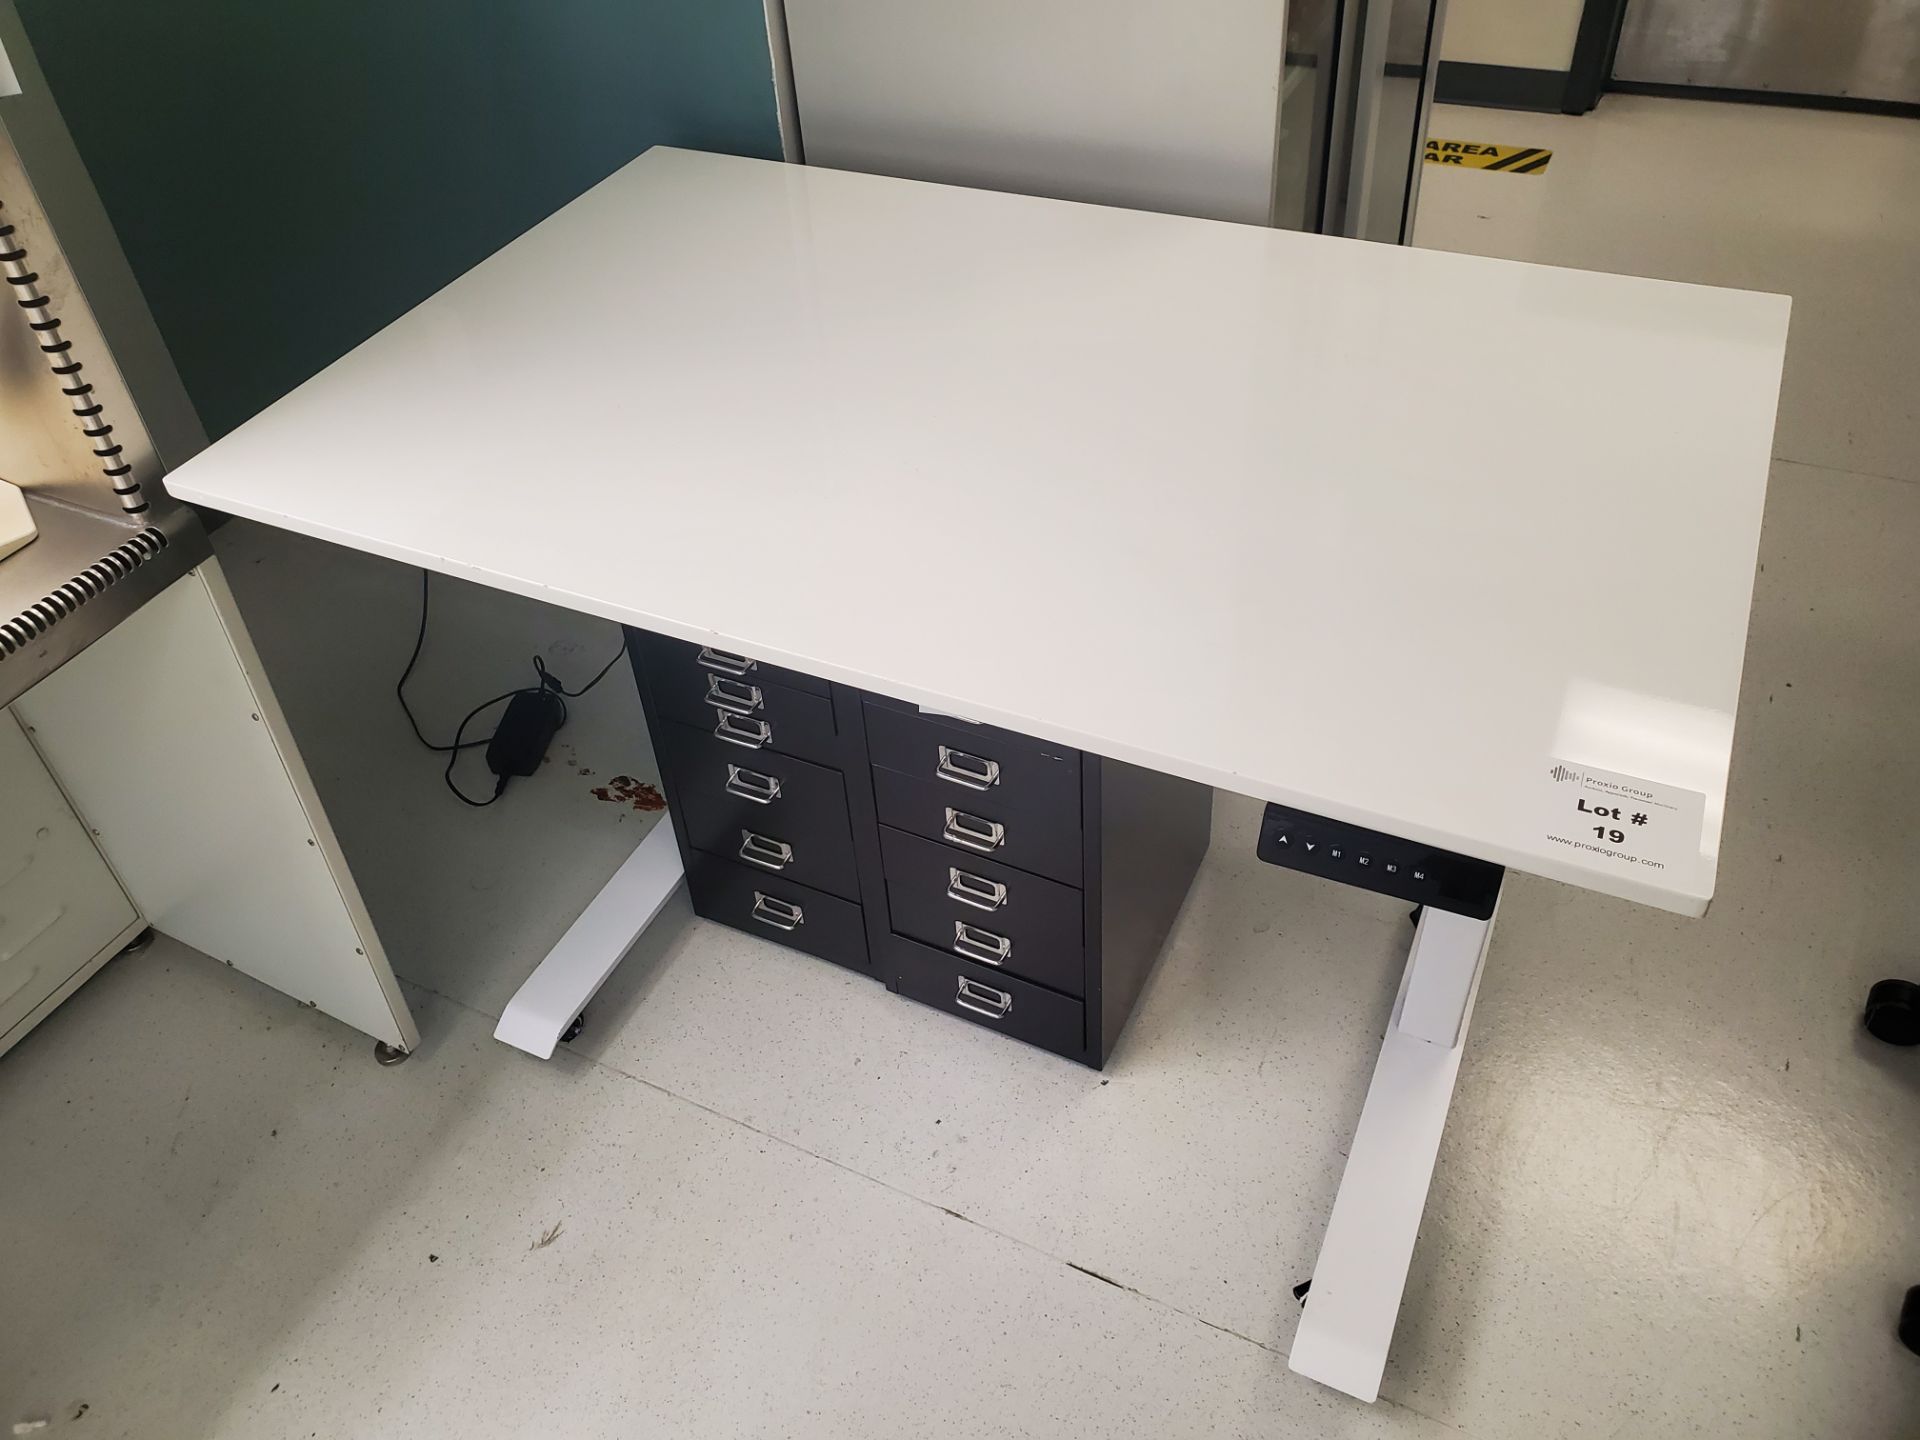 Desk Store Approx 48" x 24" Adjustable Height Stand Up Desk With Programmable Height Controller - Image 3 of 5